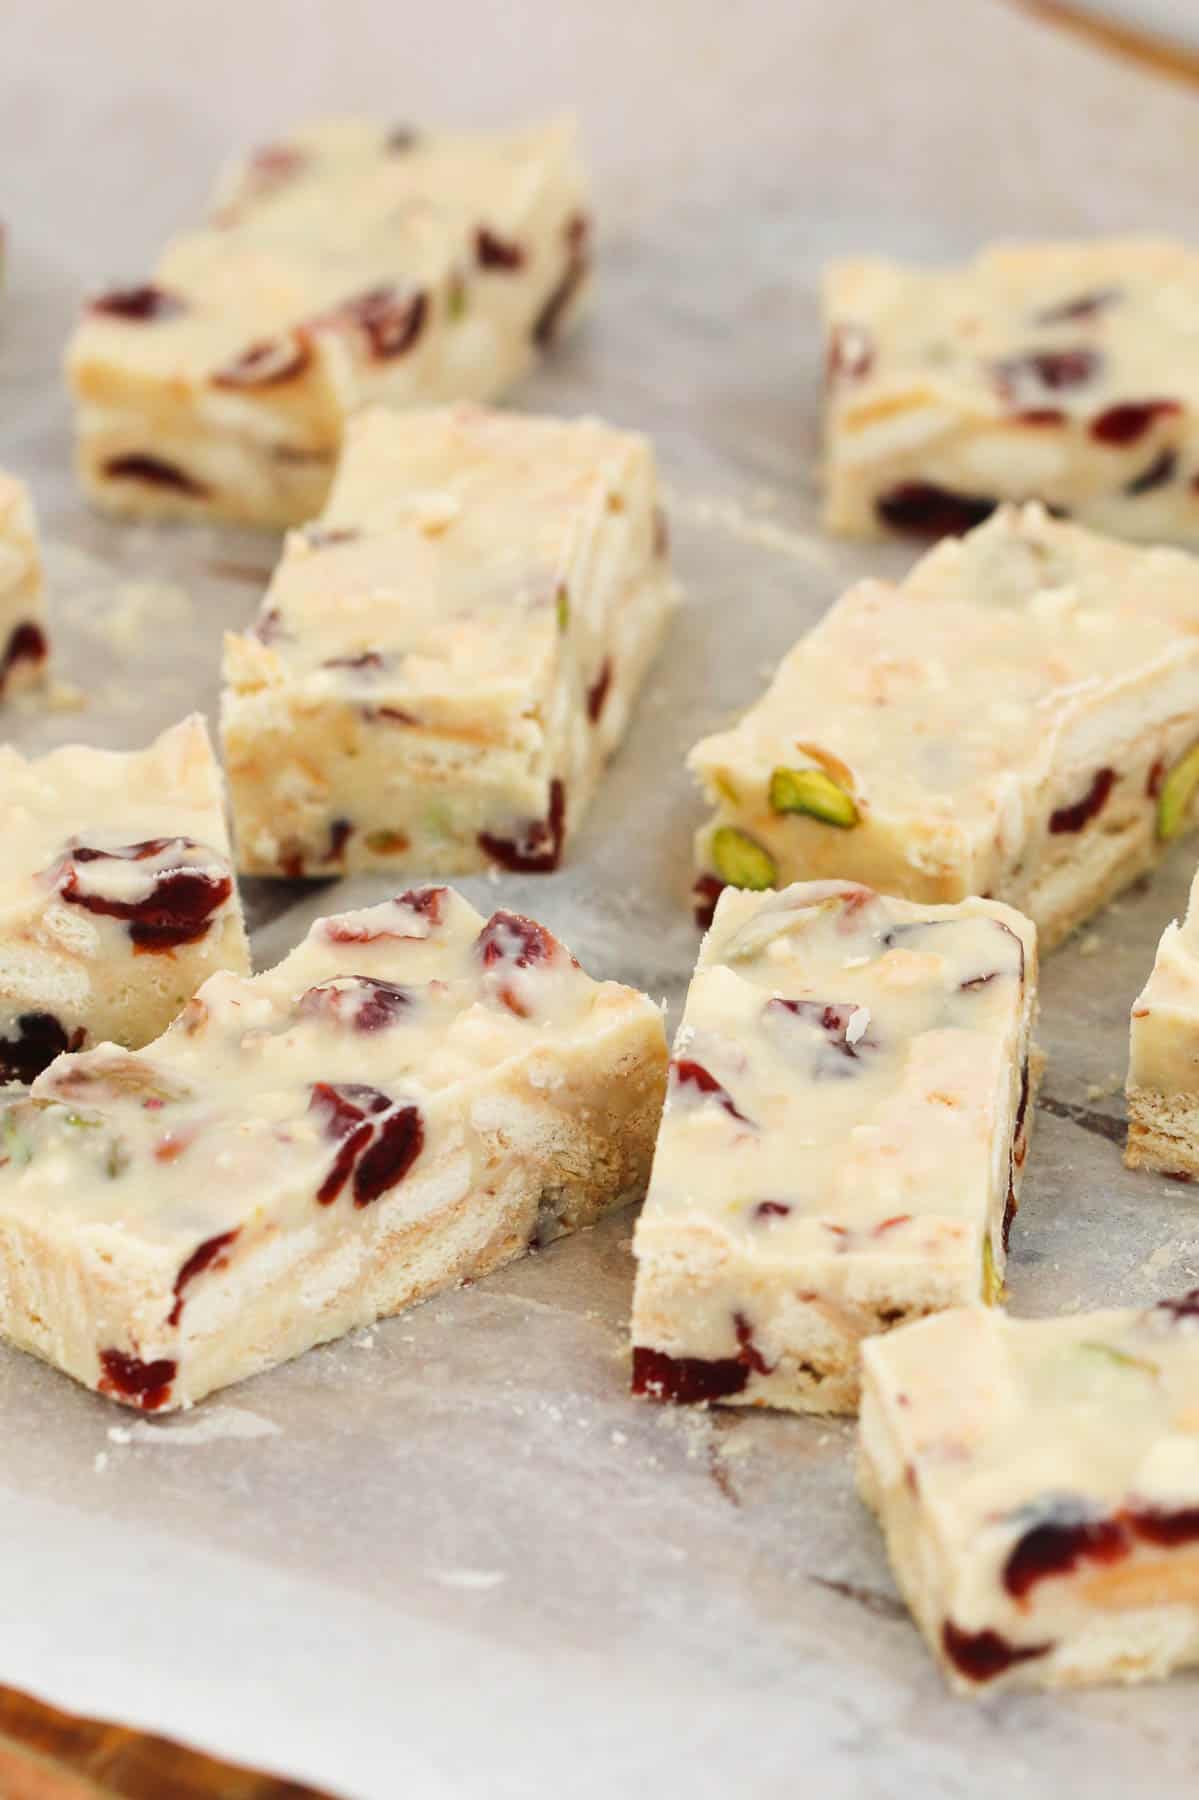 Pieces of white chocolate, pistachio and cranberry slice on baking paper.